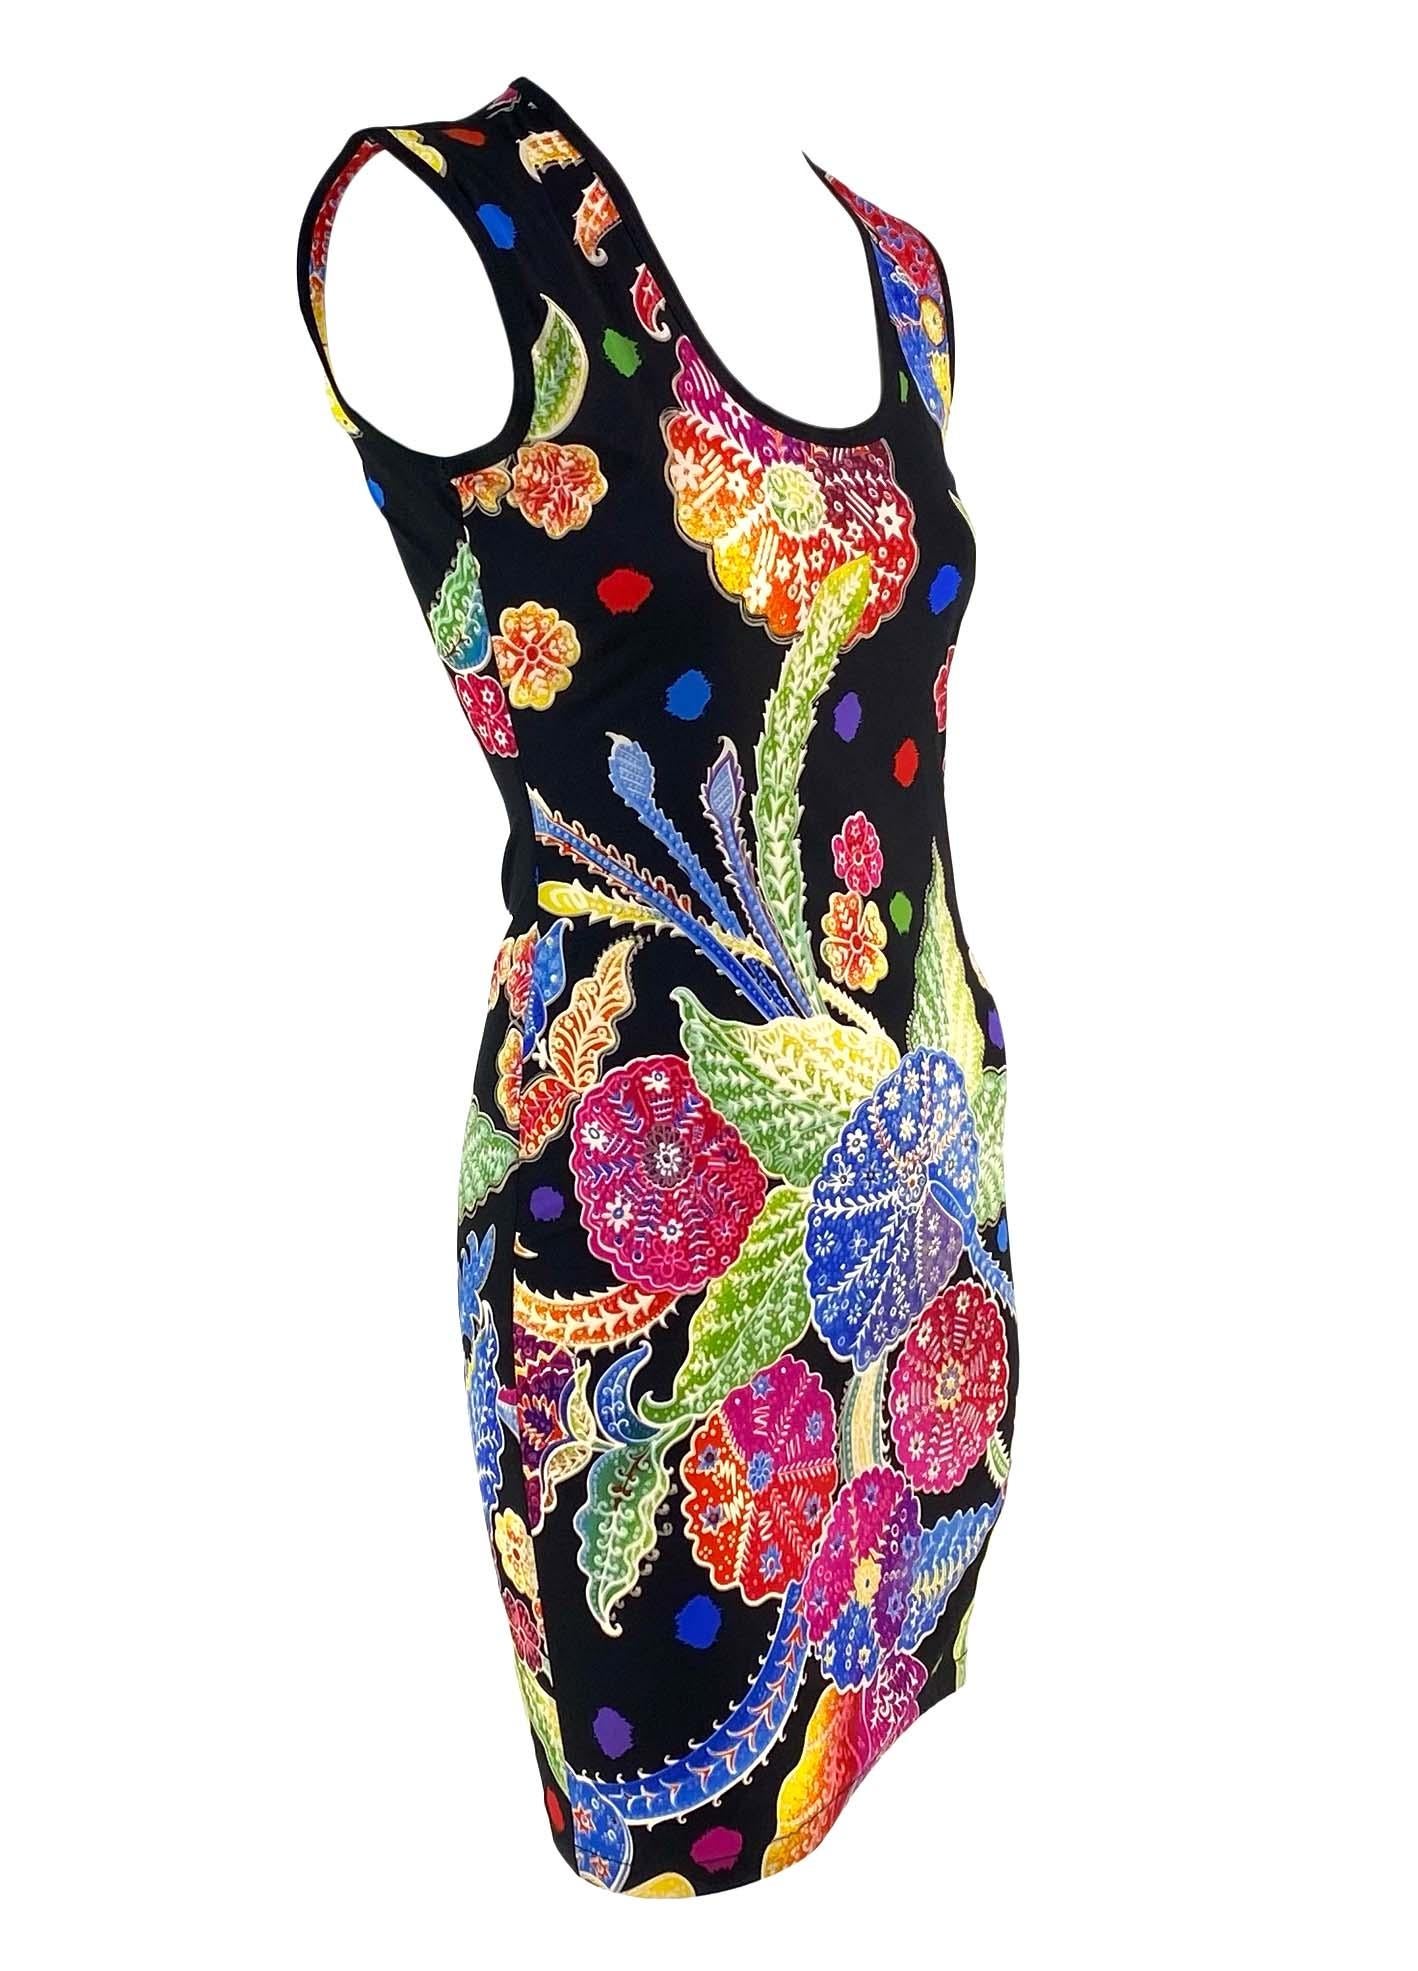 F/W 1993 Gianni Versace Couture Black Multicolor Floral Stretch Sleeveless Dress 1